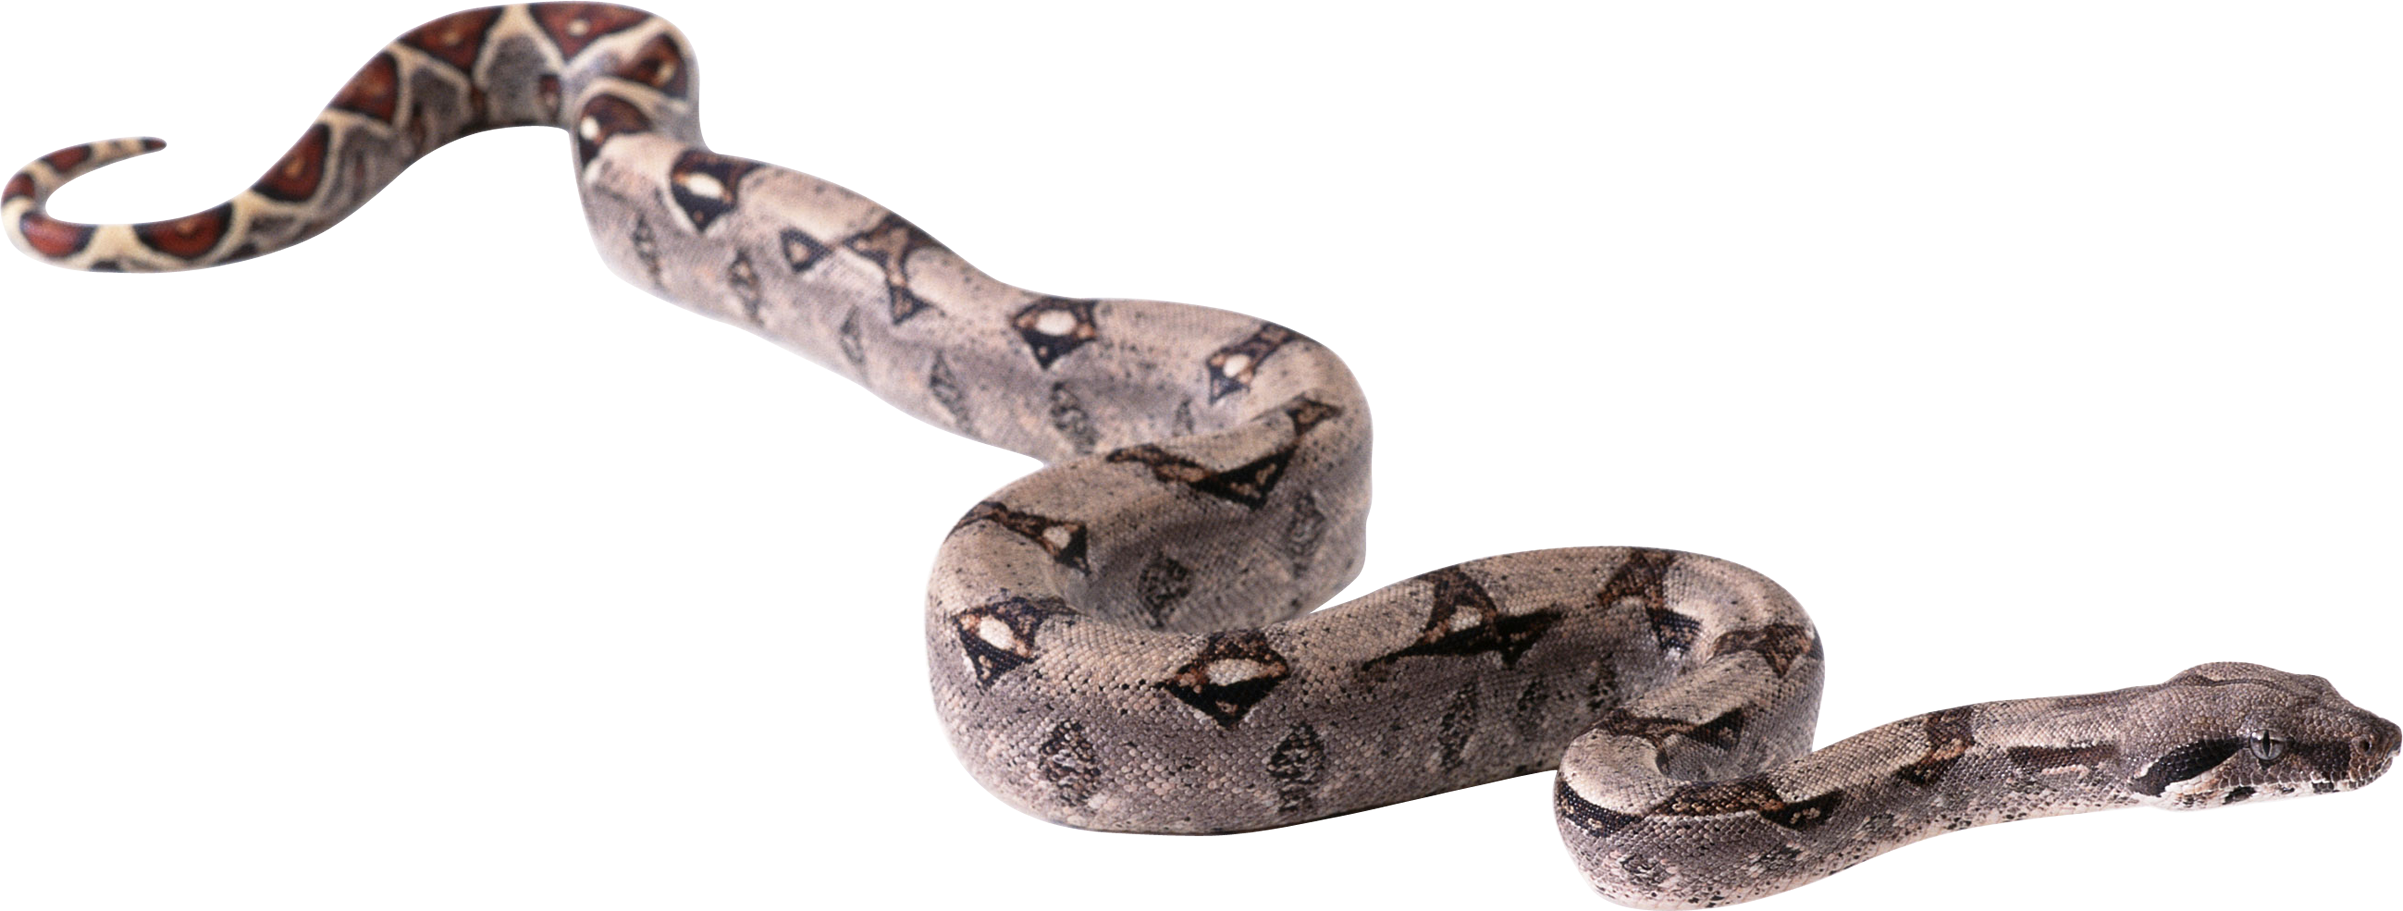 tooth clipart snake